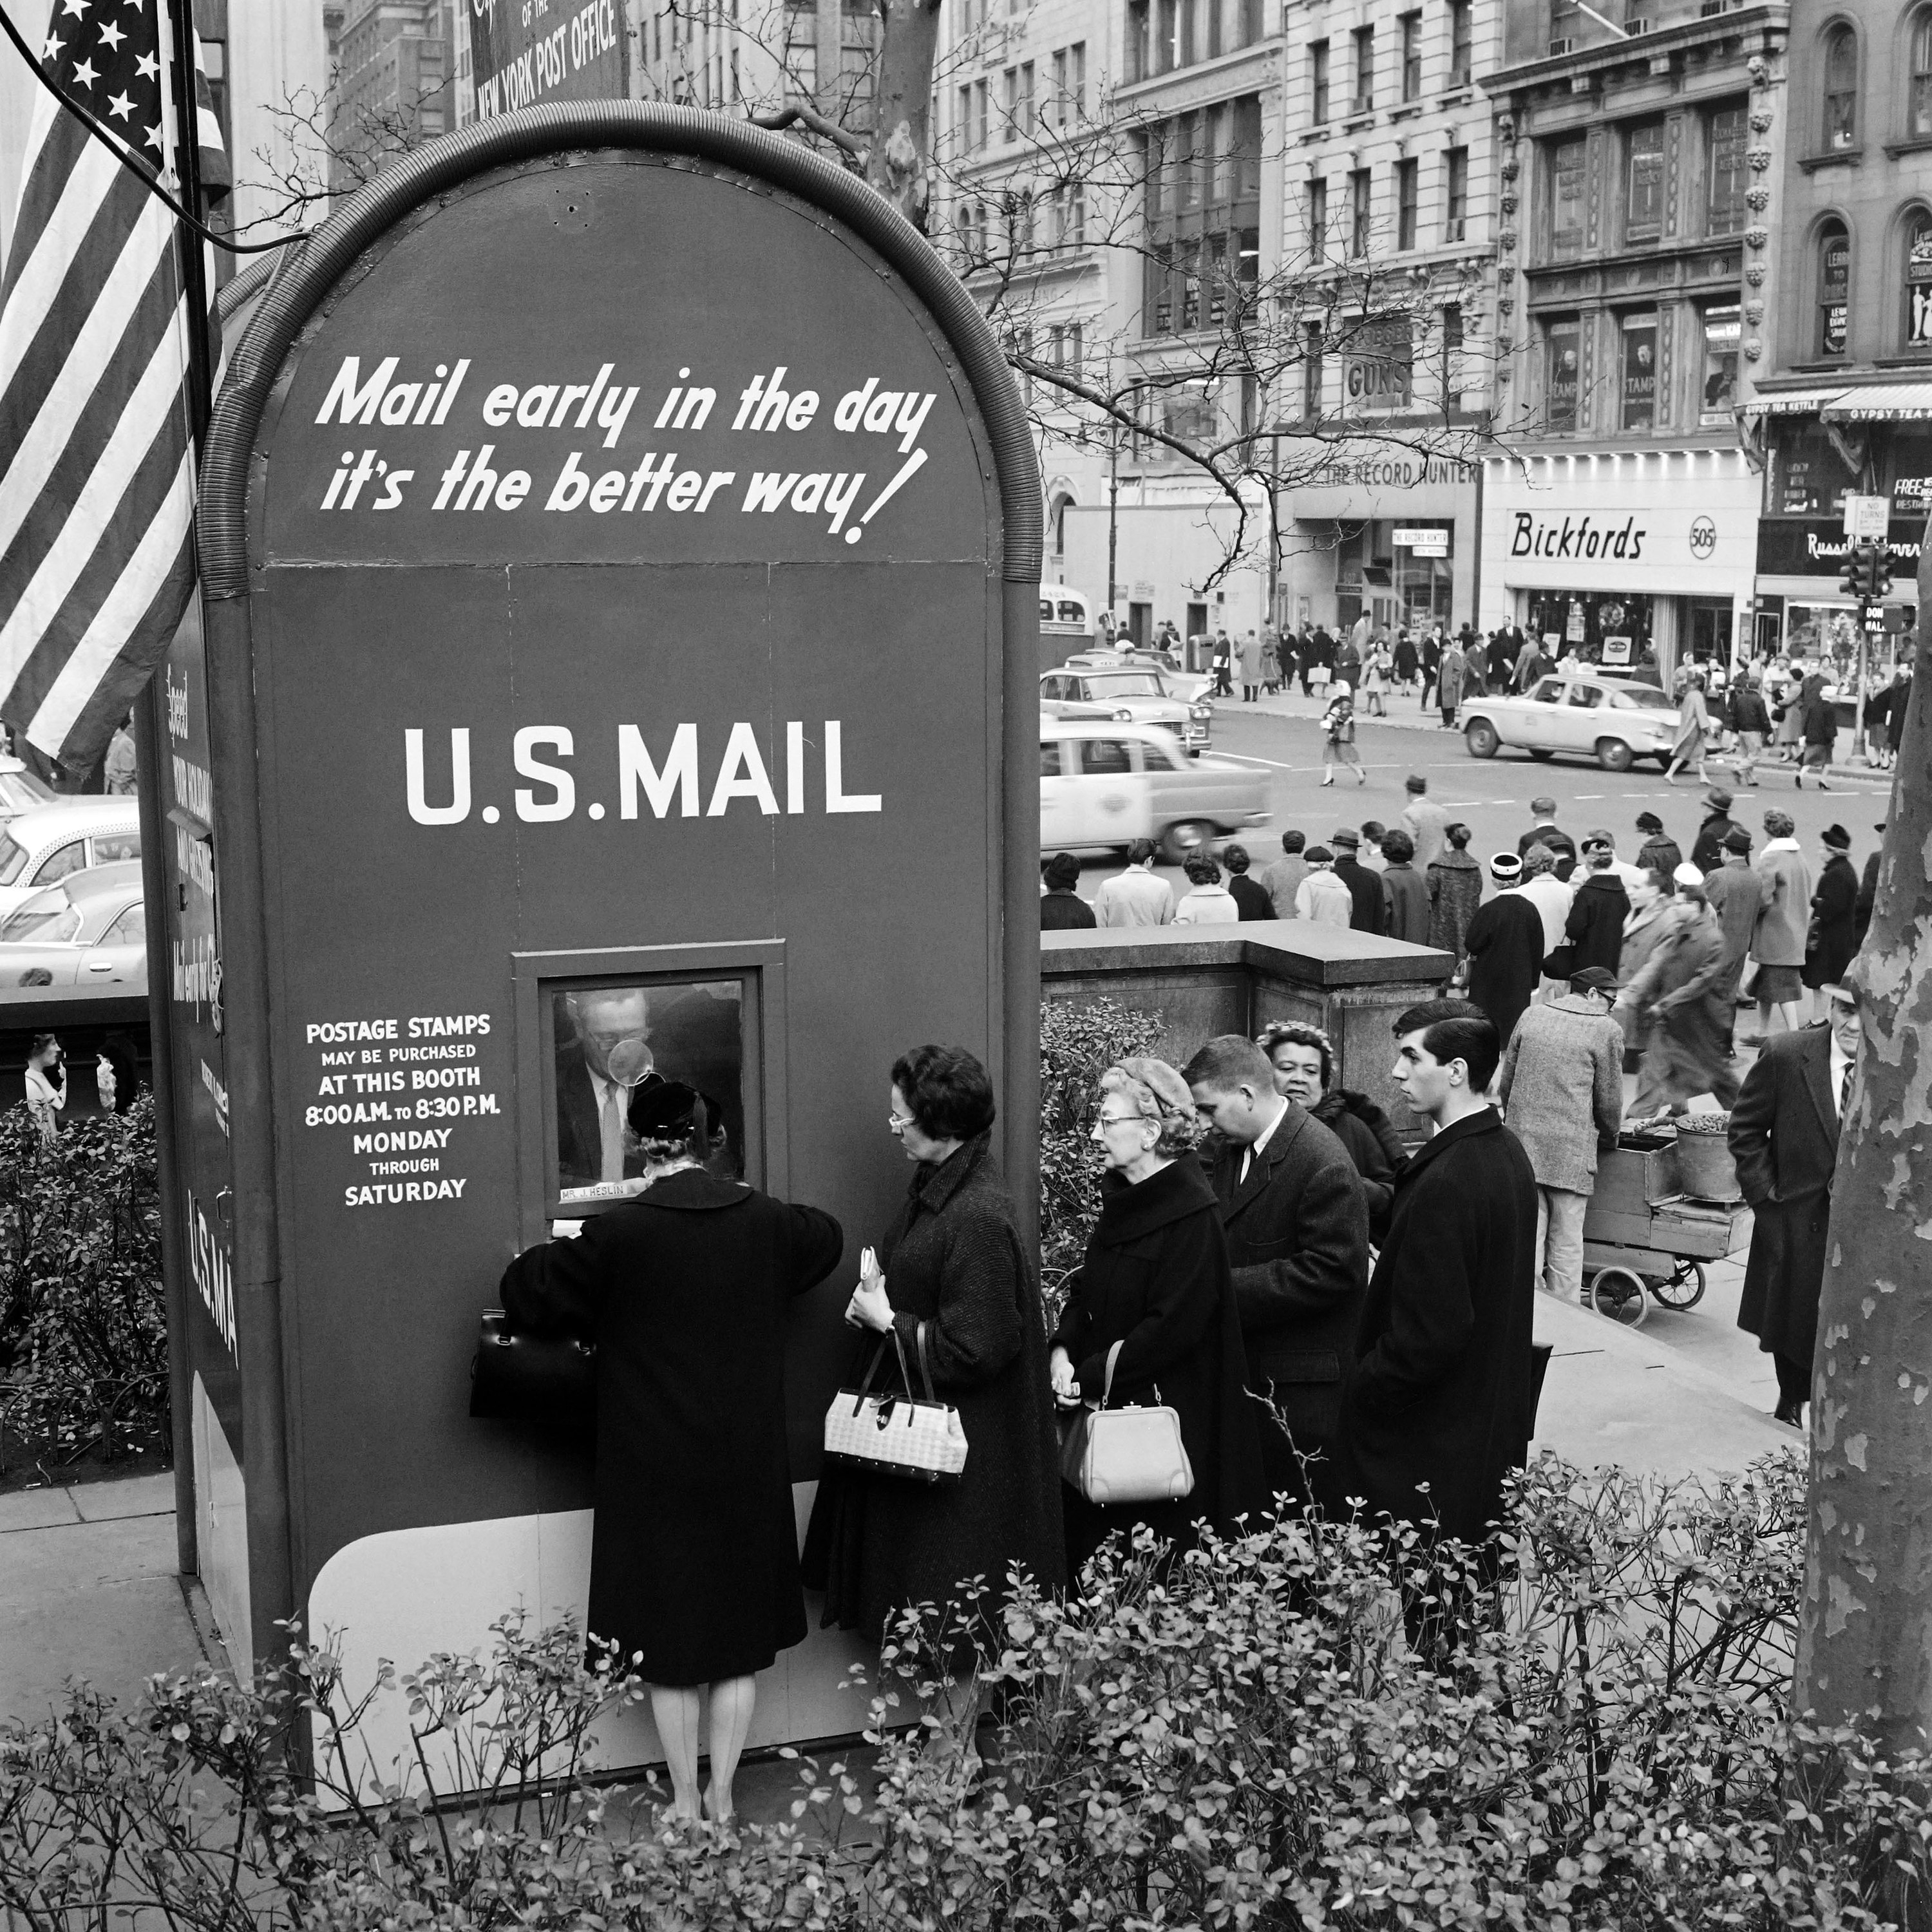 Well-dressed men and women stand in line to drop off letters in a booth shaped like a giant mailbox in a city square